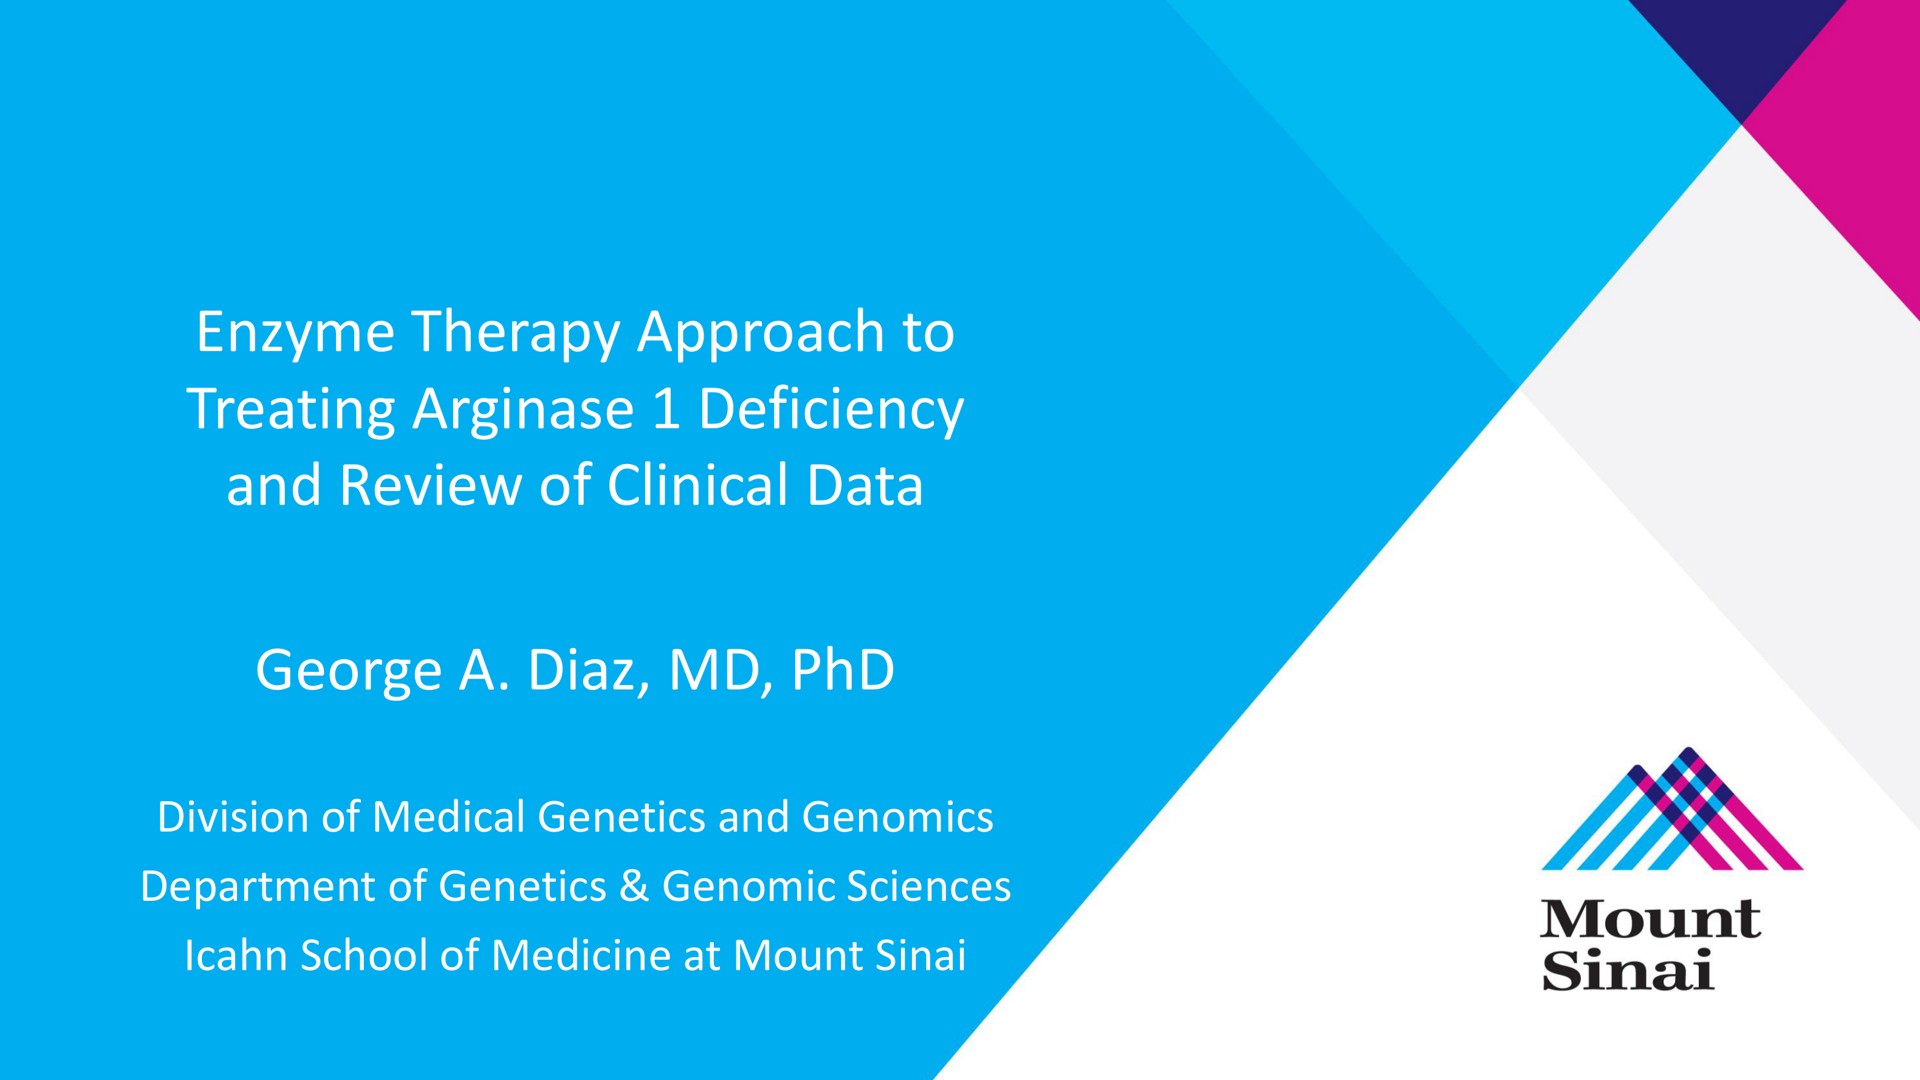 enzyme therapy approach to treating deficiency and review of clinical data a | Aeglea BioTherapeutics